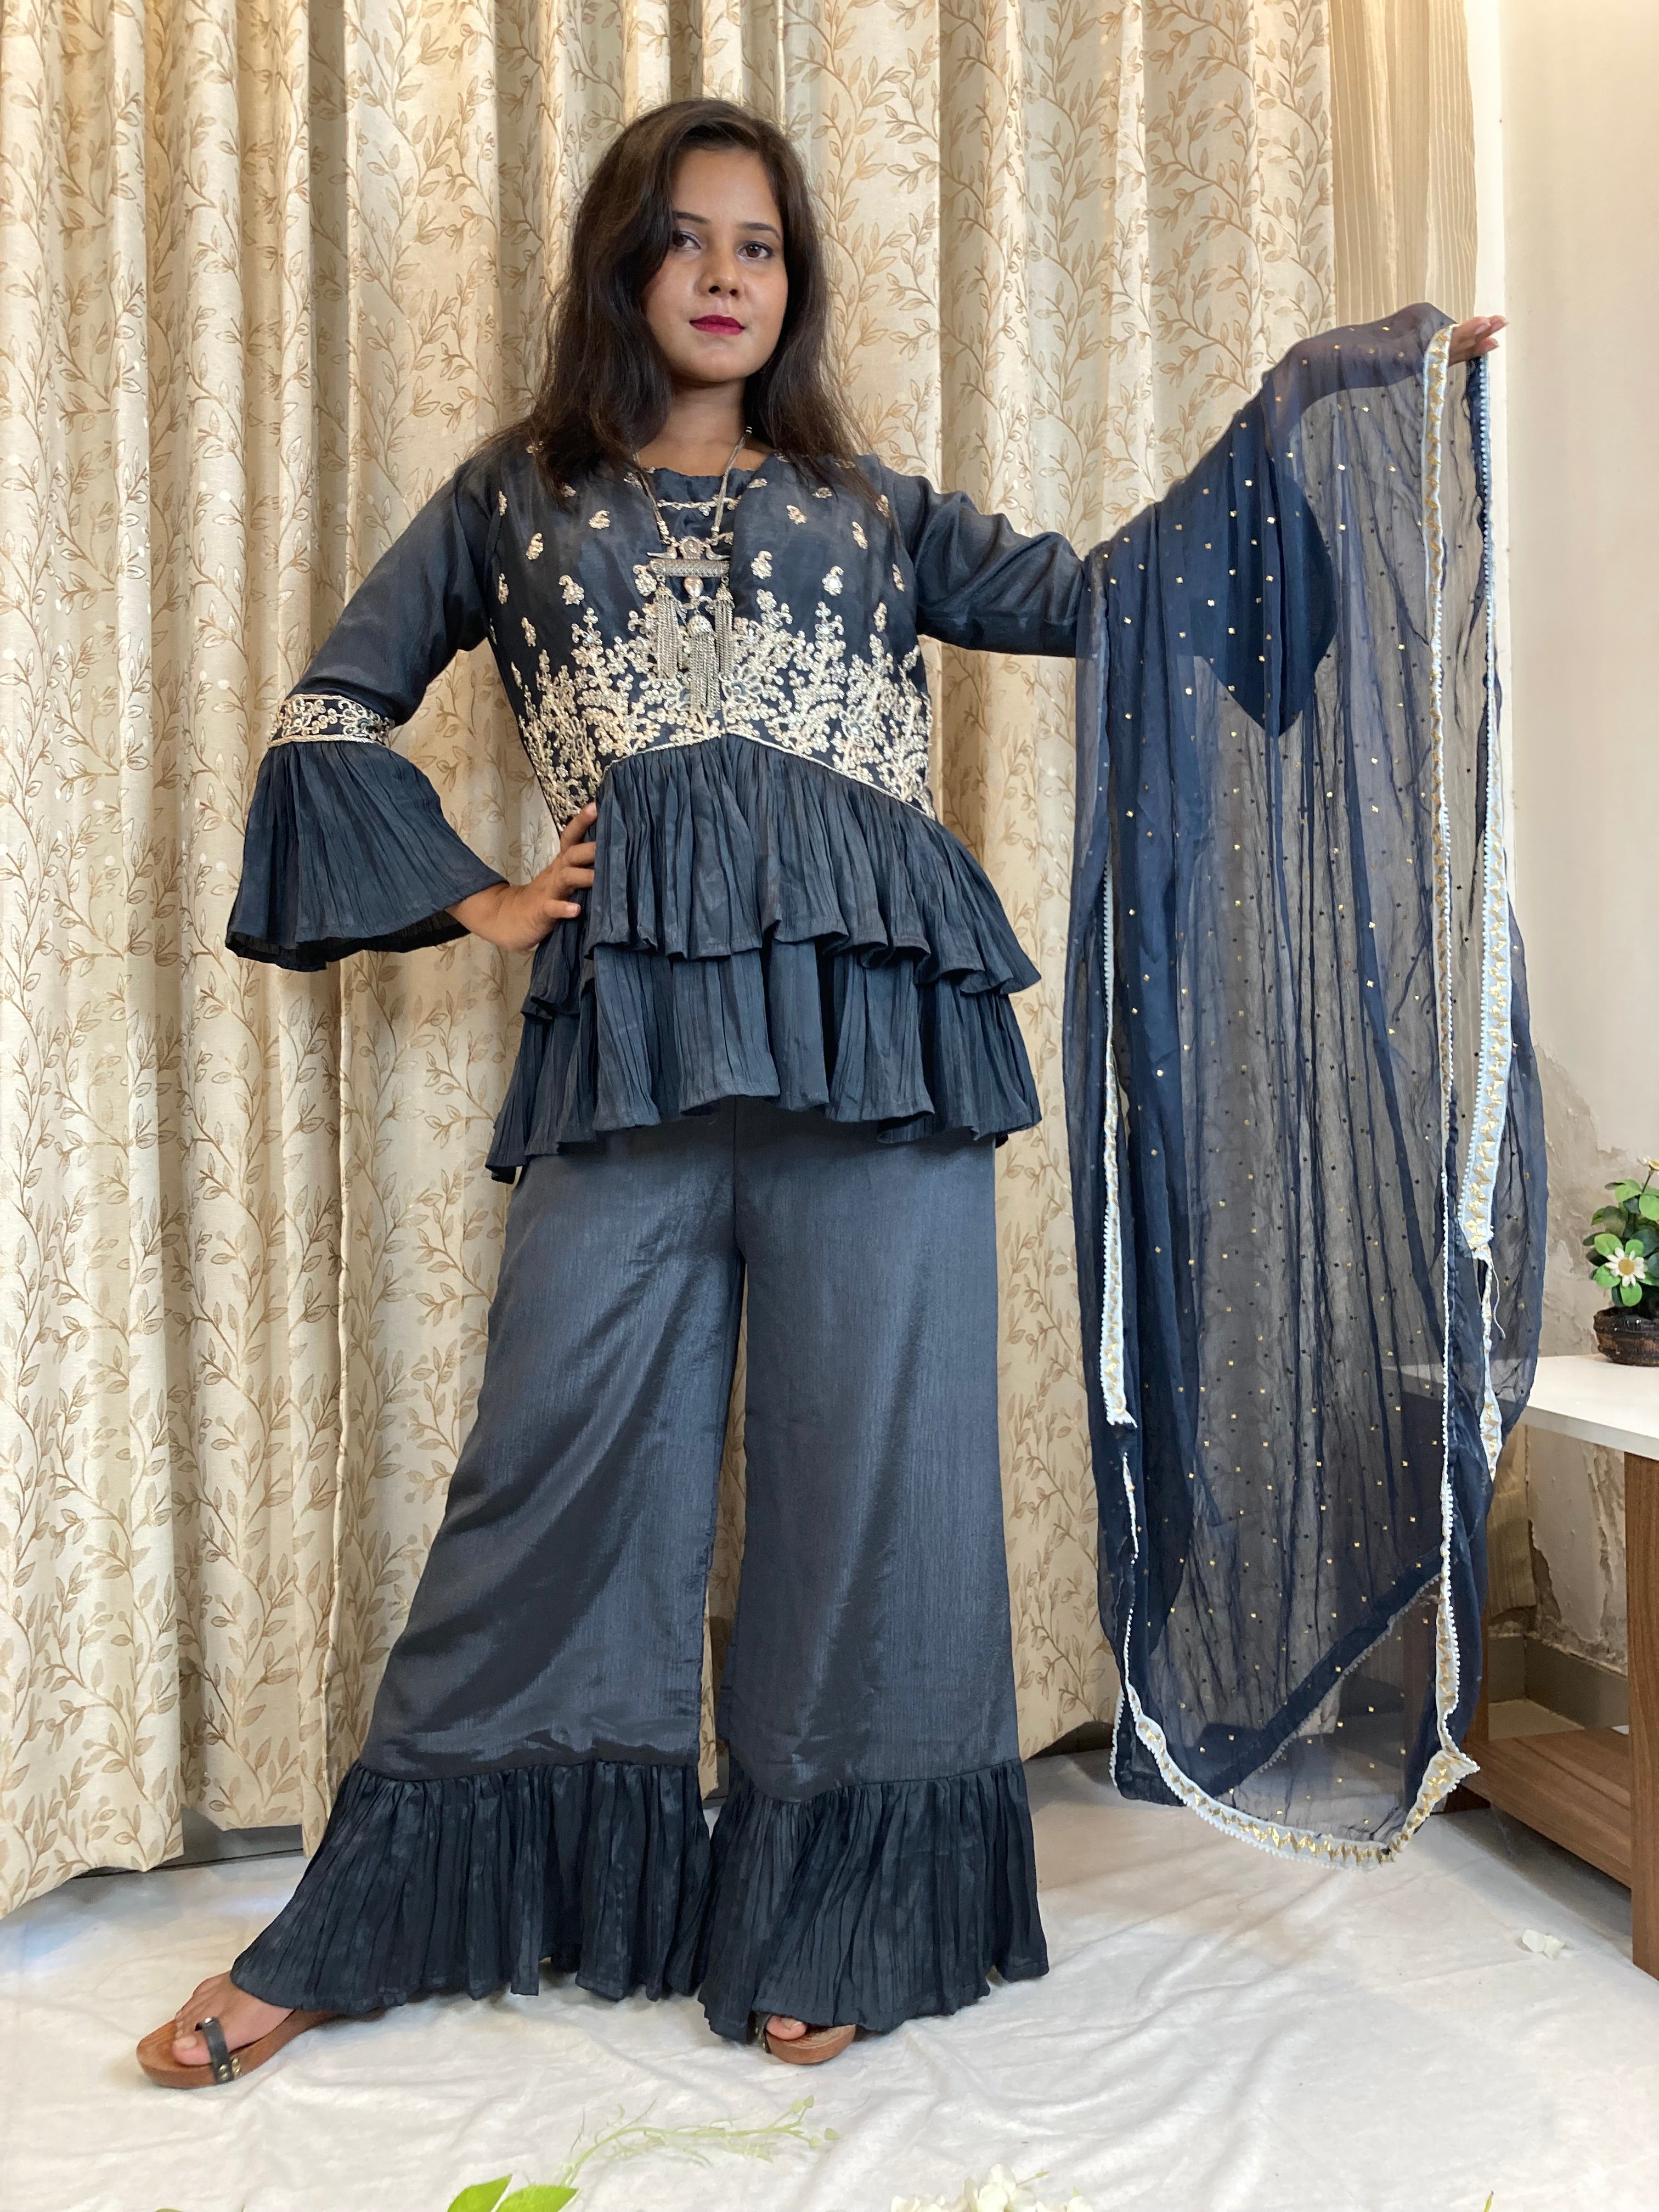 The Salwar Kameez Becomes Trendy in 2019. Take A Look! | Trendy outfits  indian, Indian fashion dresses, Dress indian style